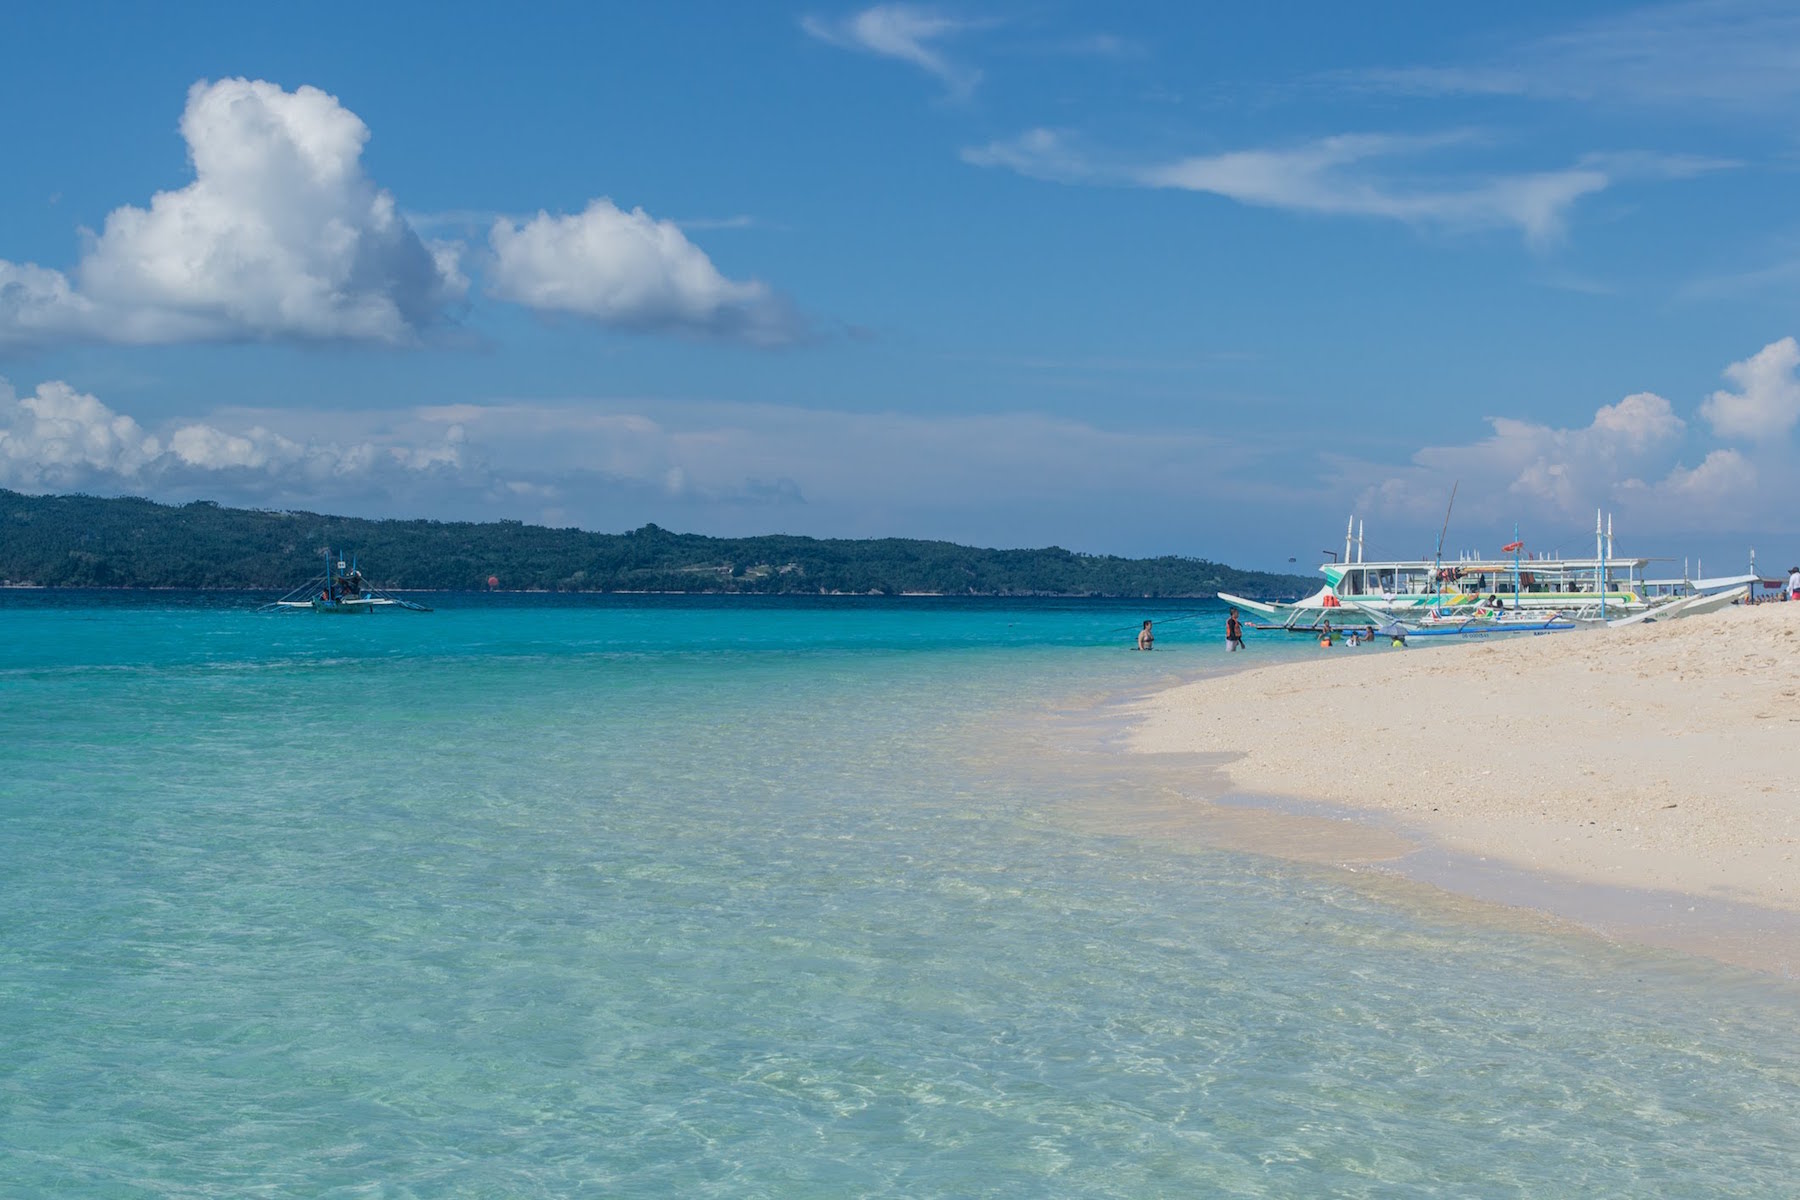 Boracay island should definitely be on your Philippines travel guide--the turquoise water is beautiful!